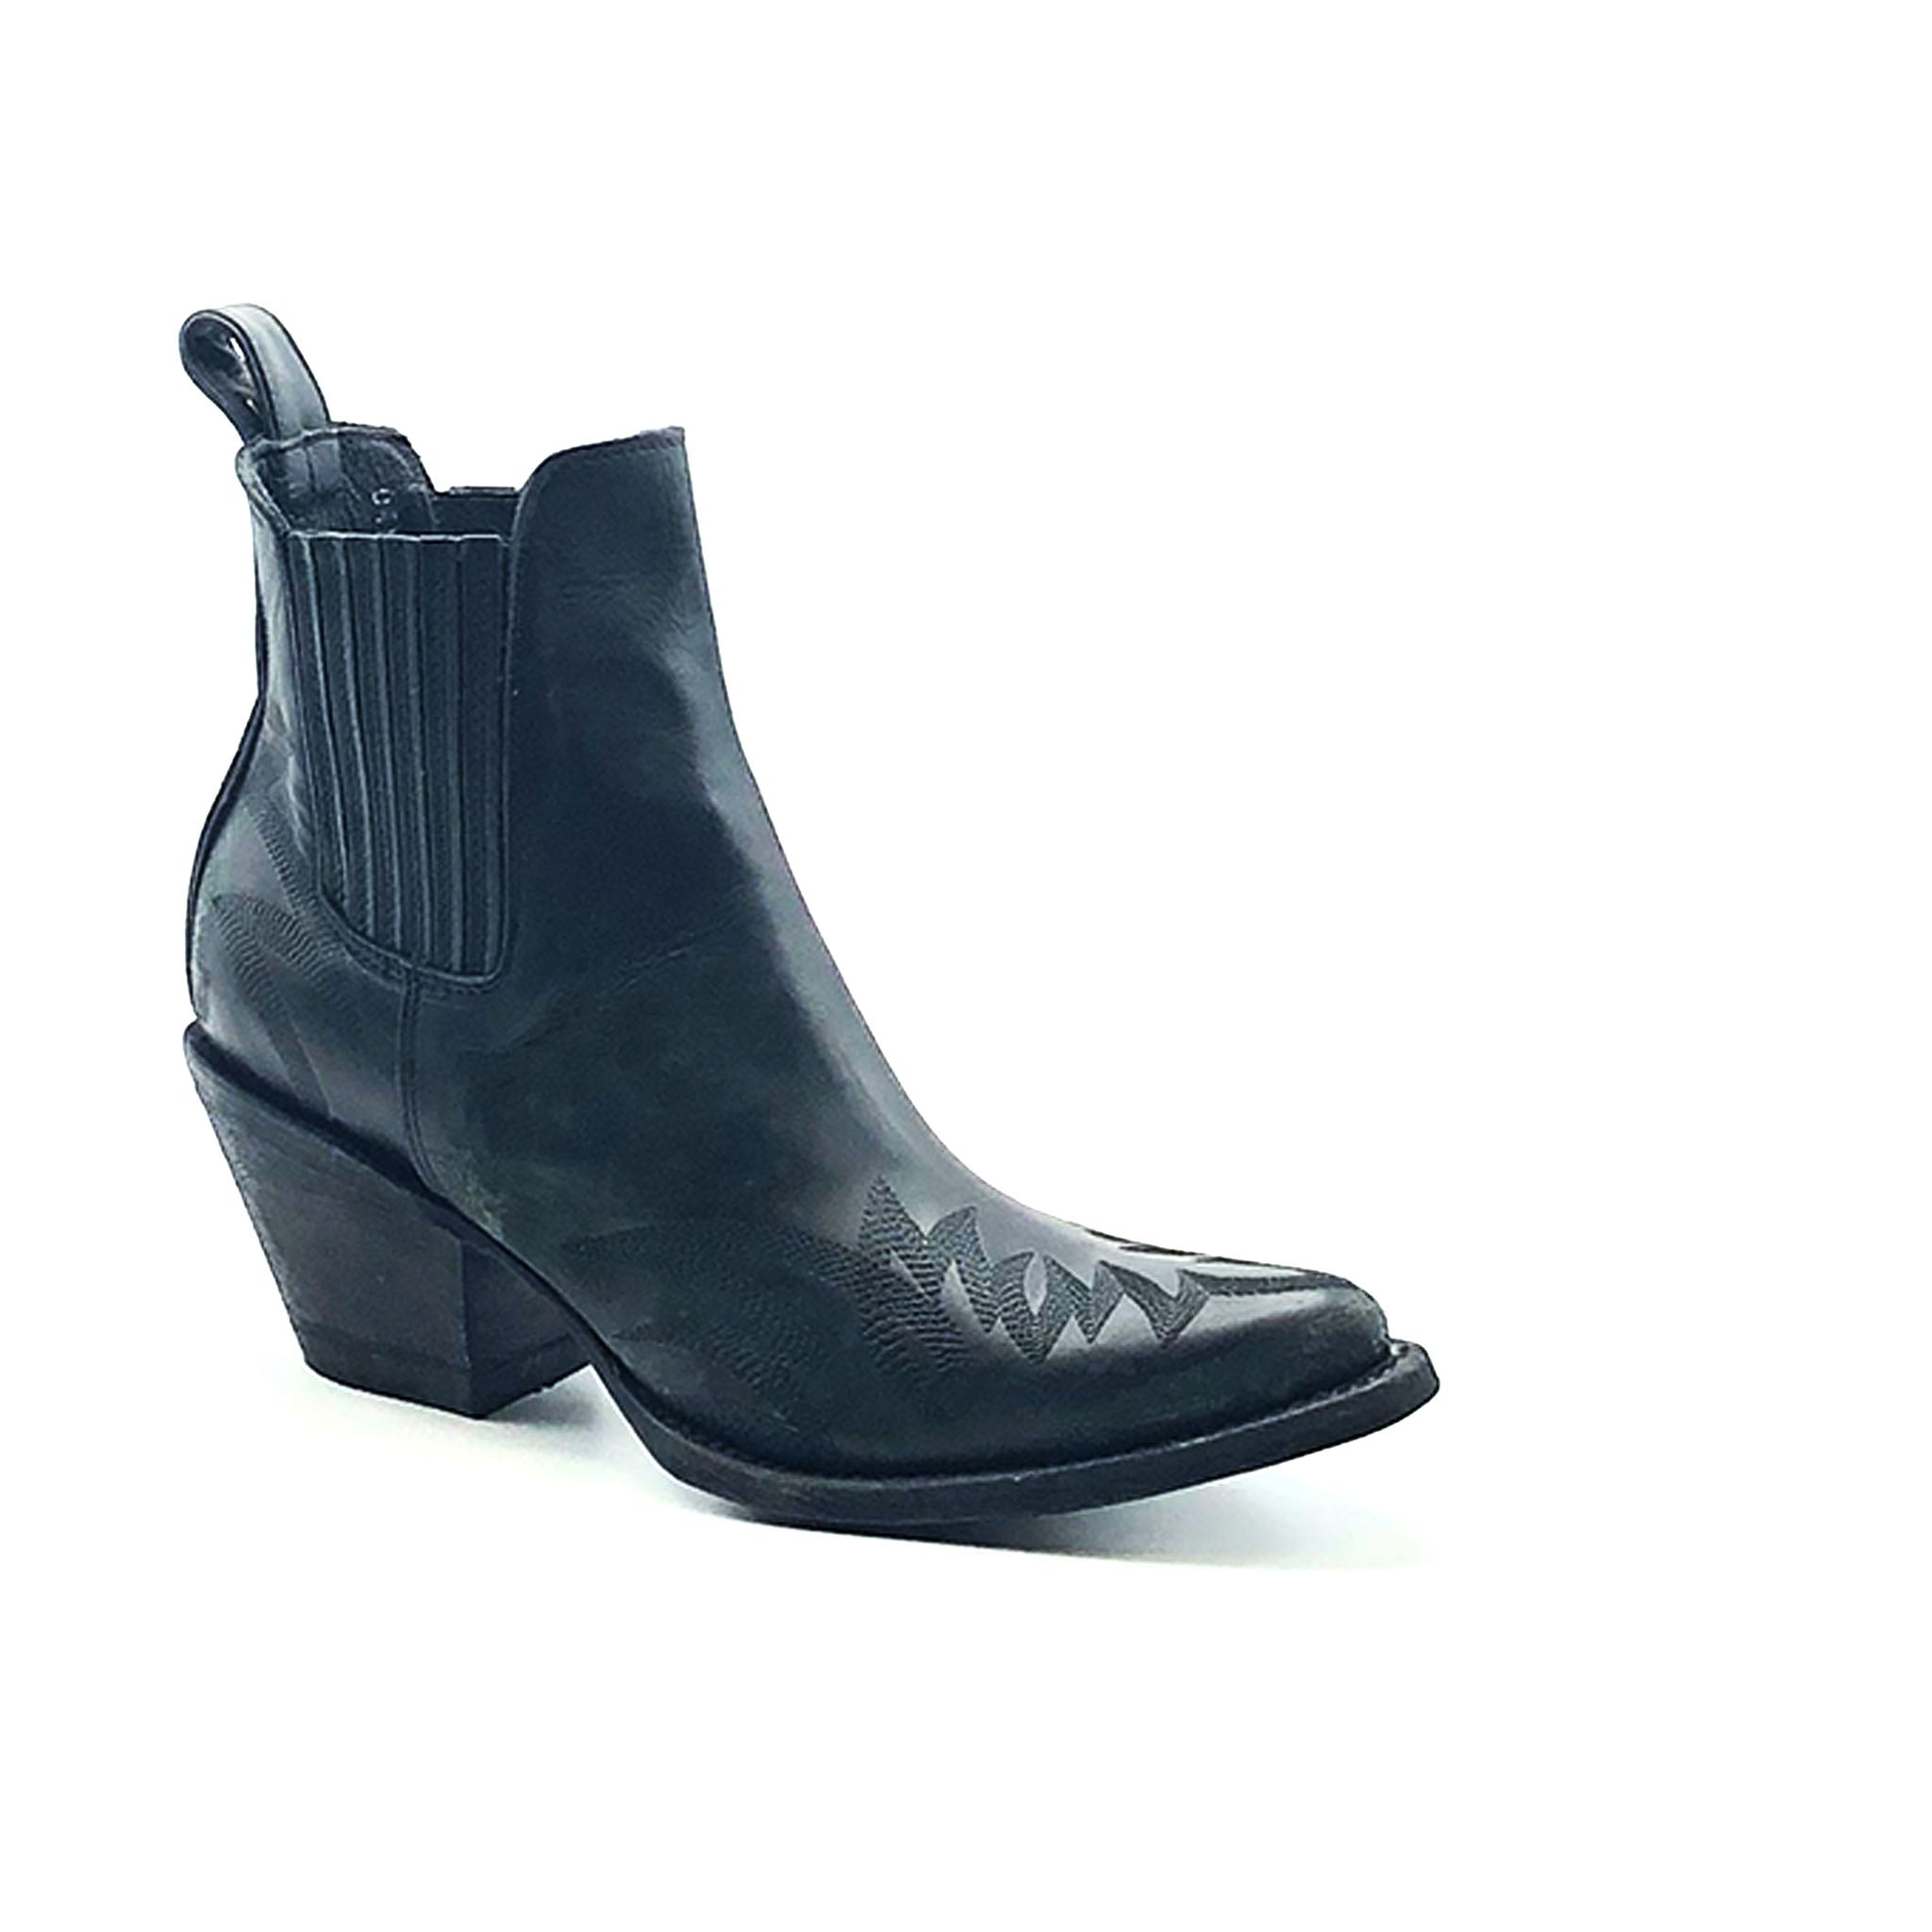 Women's Distressed Black Ankle Boots | Los Angeles – Boot Star USA